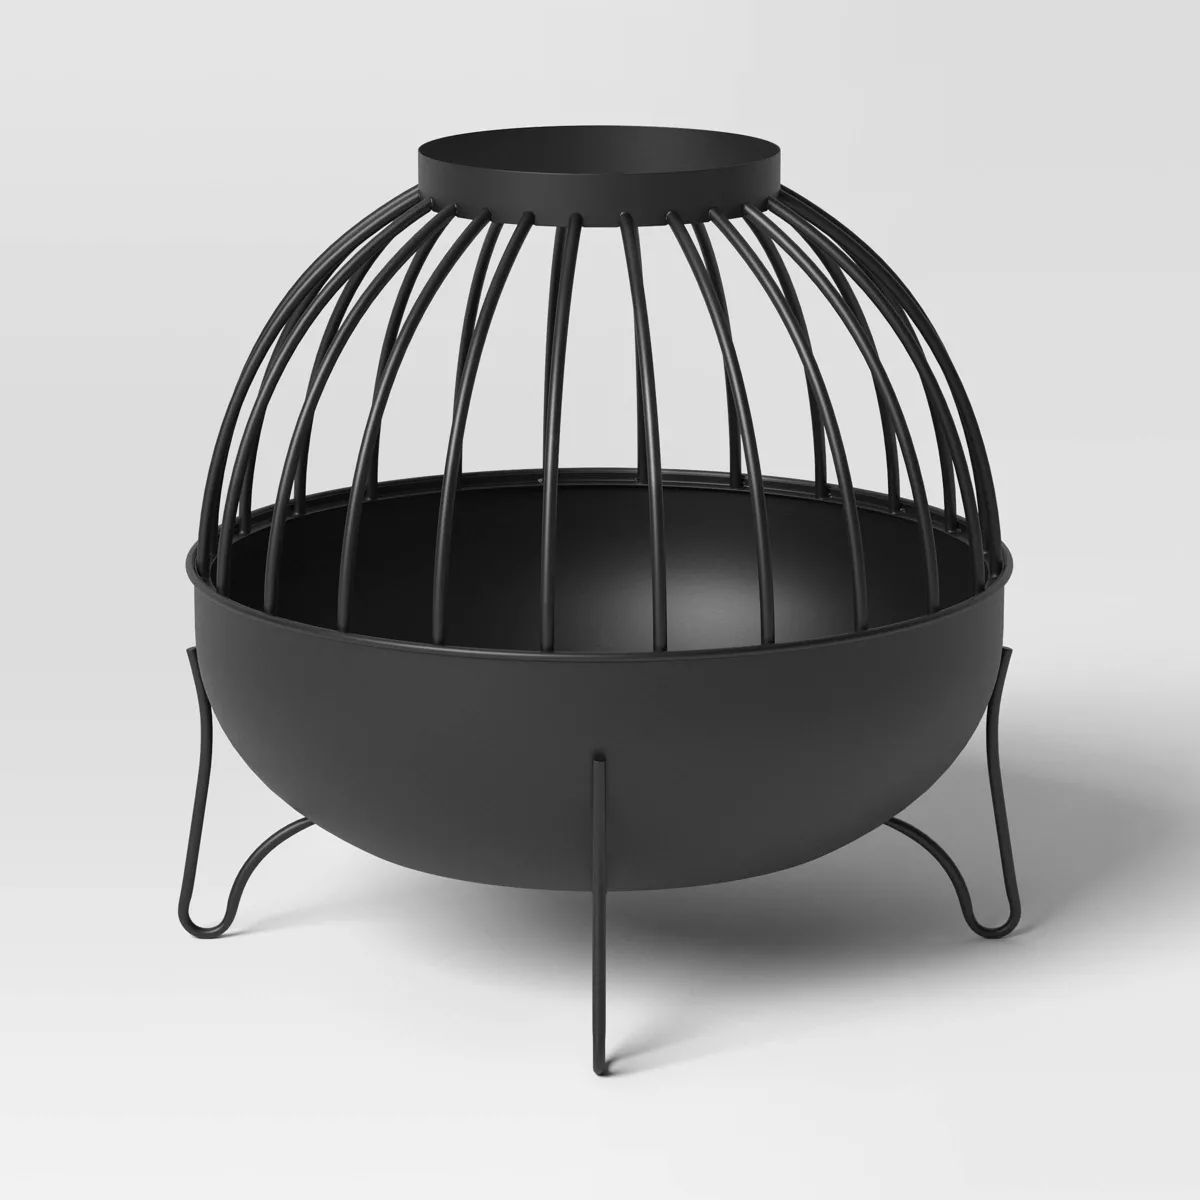 Wood Burning Cutout Round Outdoor Fire Pit Black - Threshold™ | Target